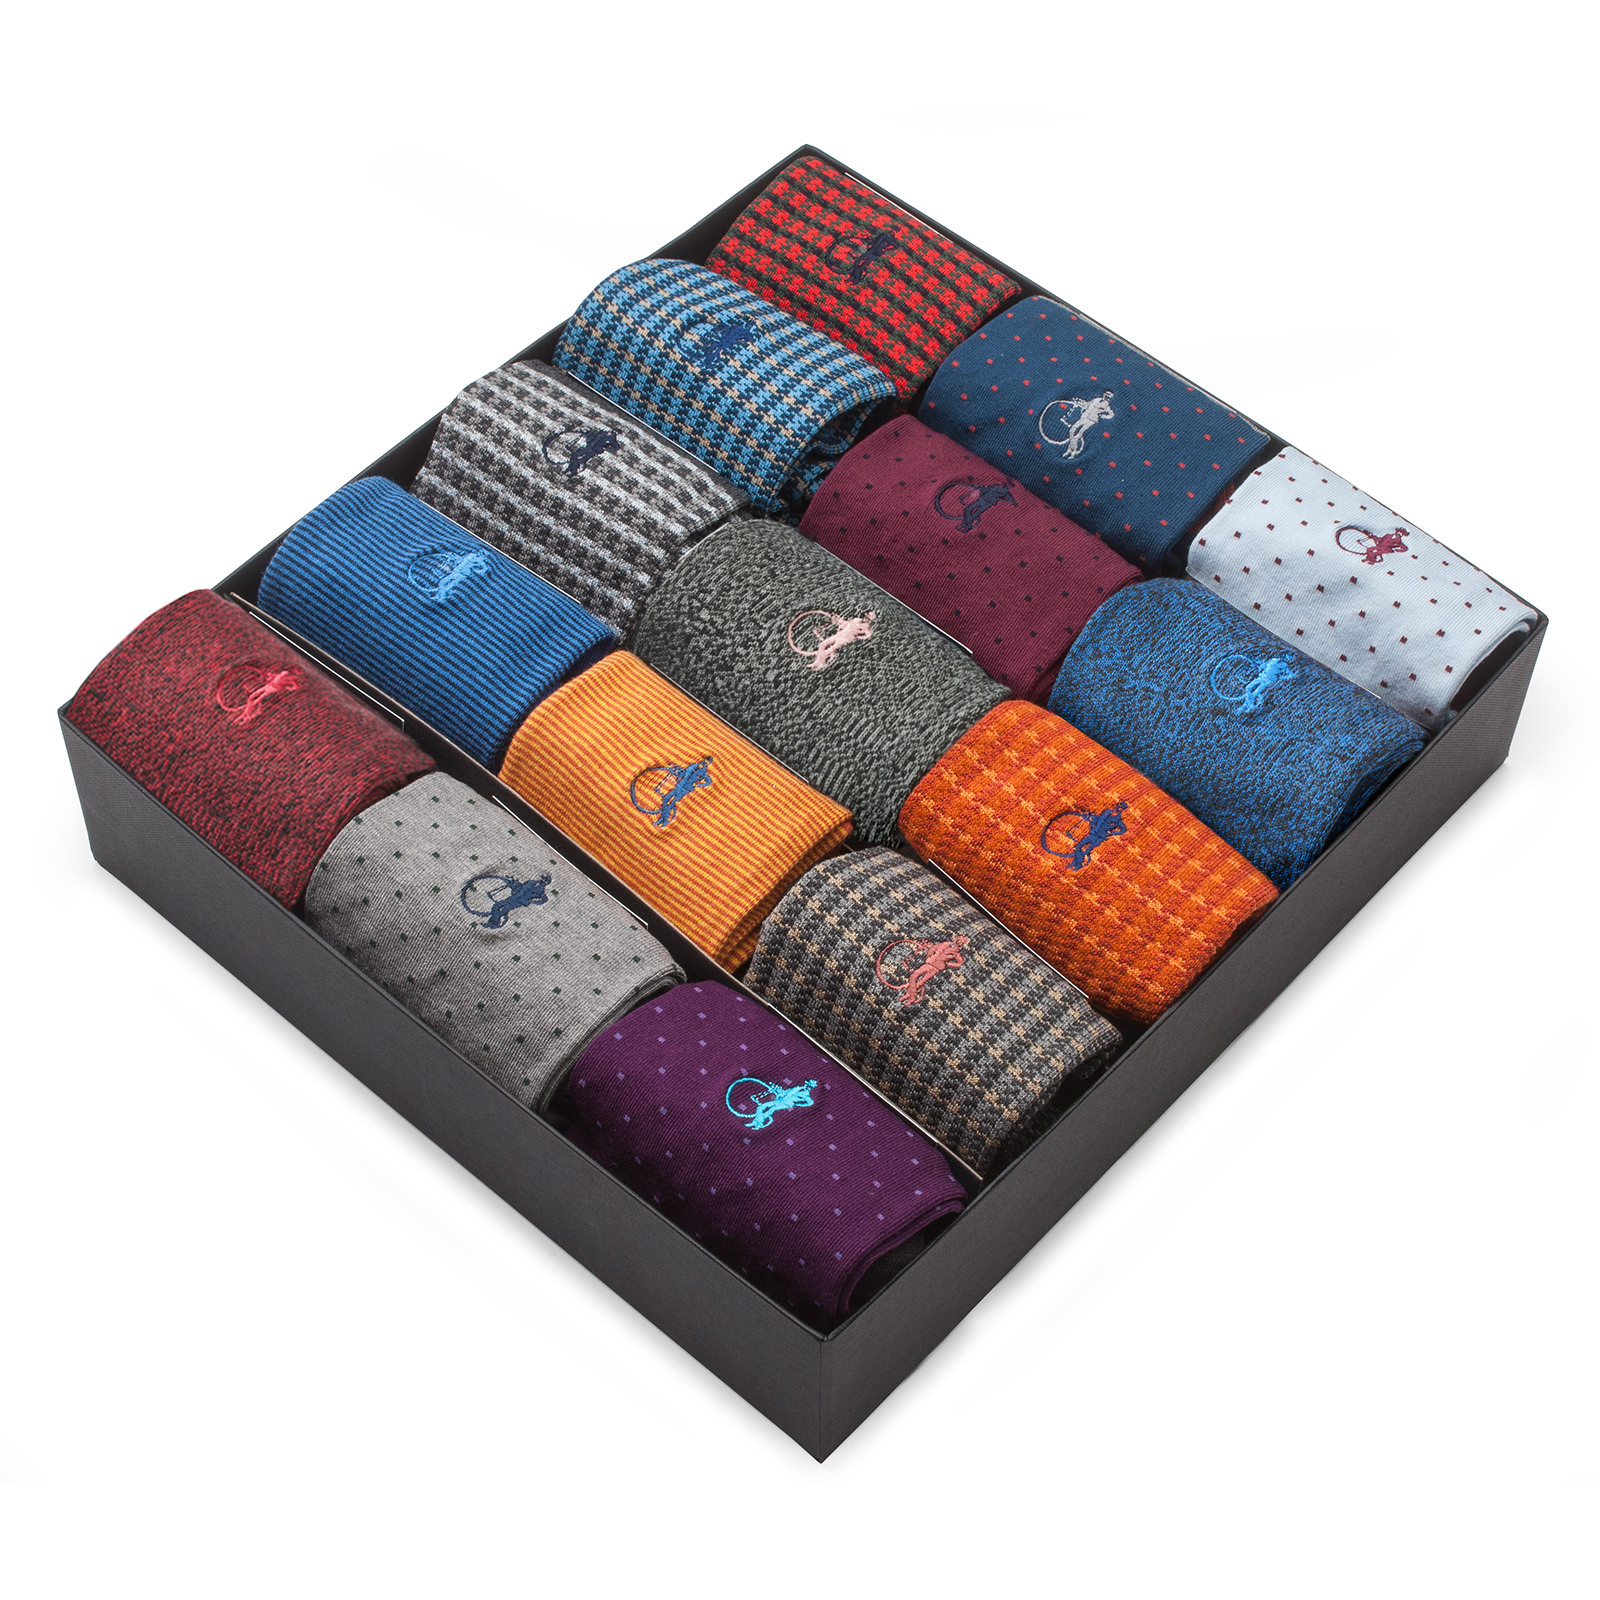 A selection of socks from the London Sock Co